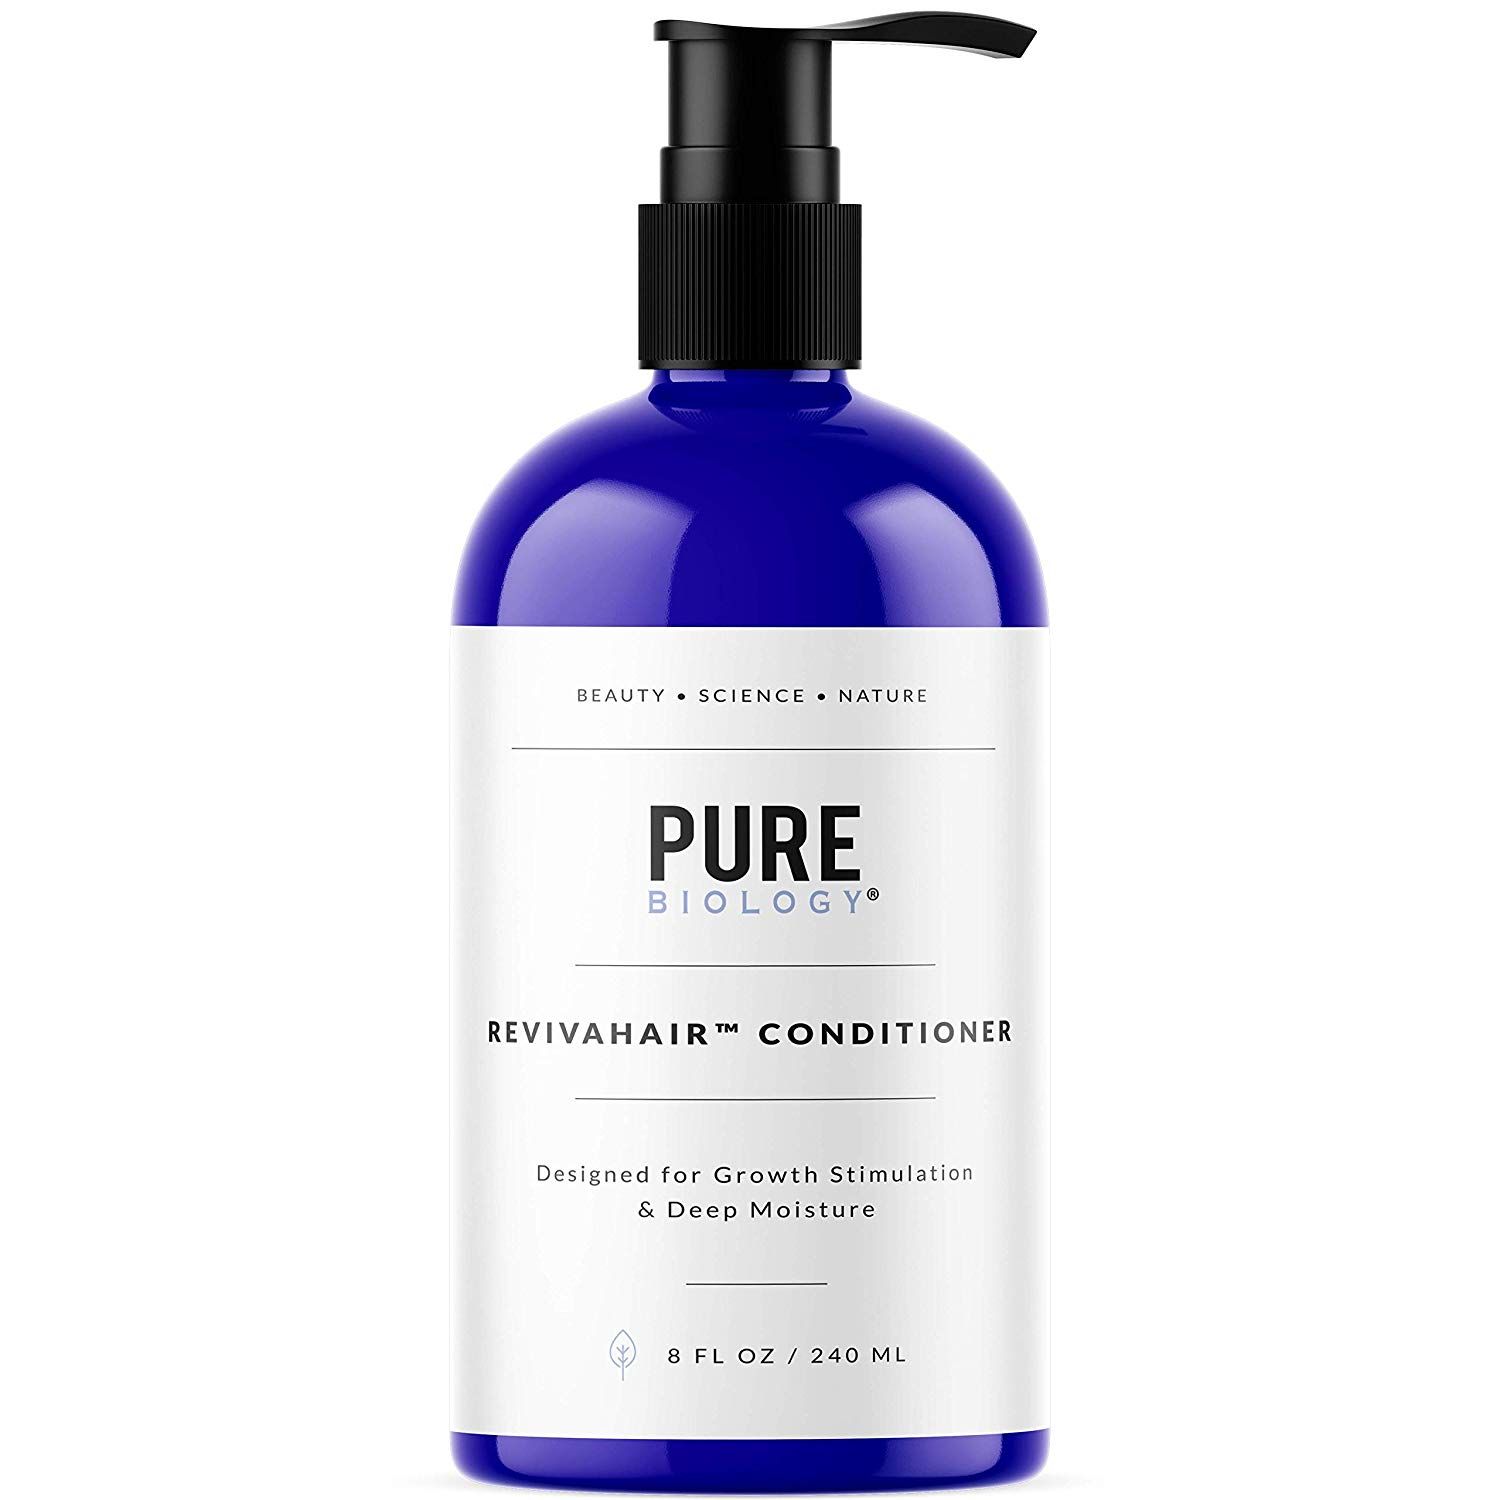 10 Best Shampoos for Hair Loss of 2020  ReviewThis